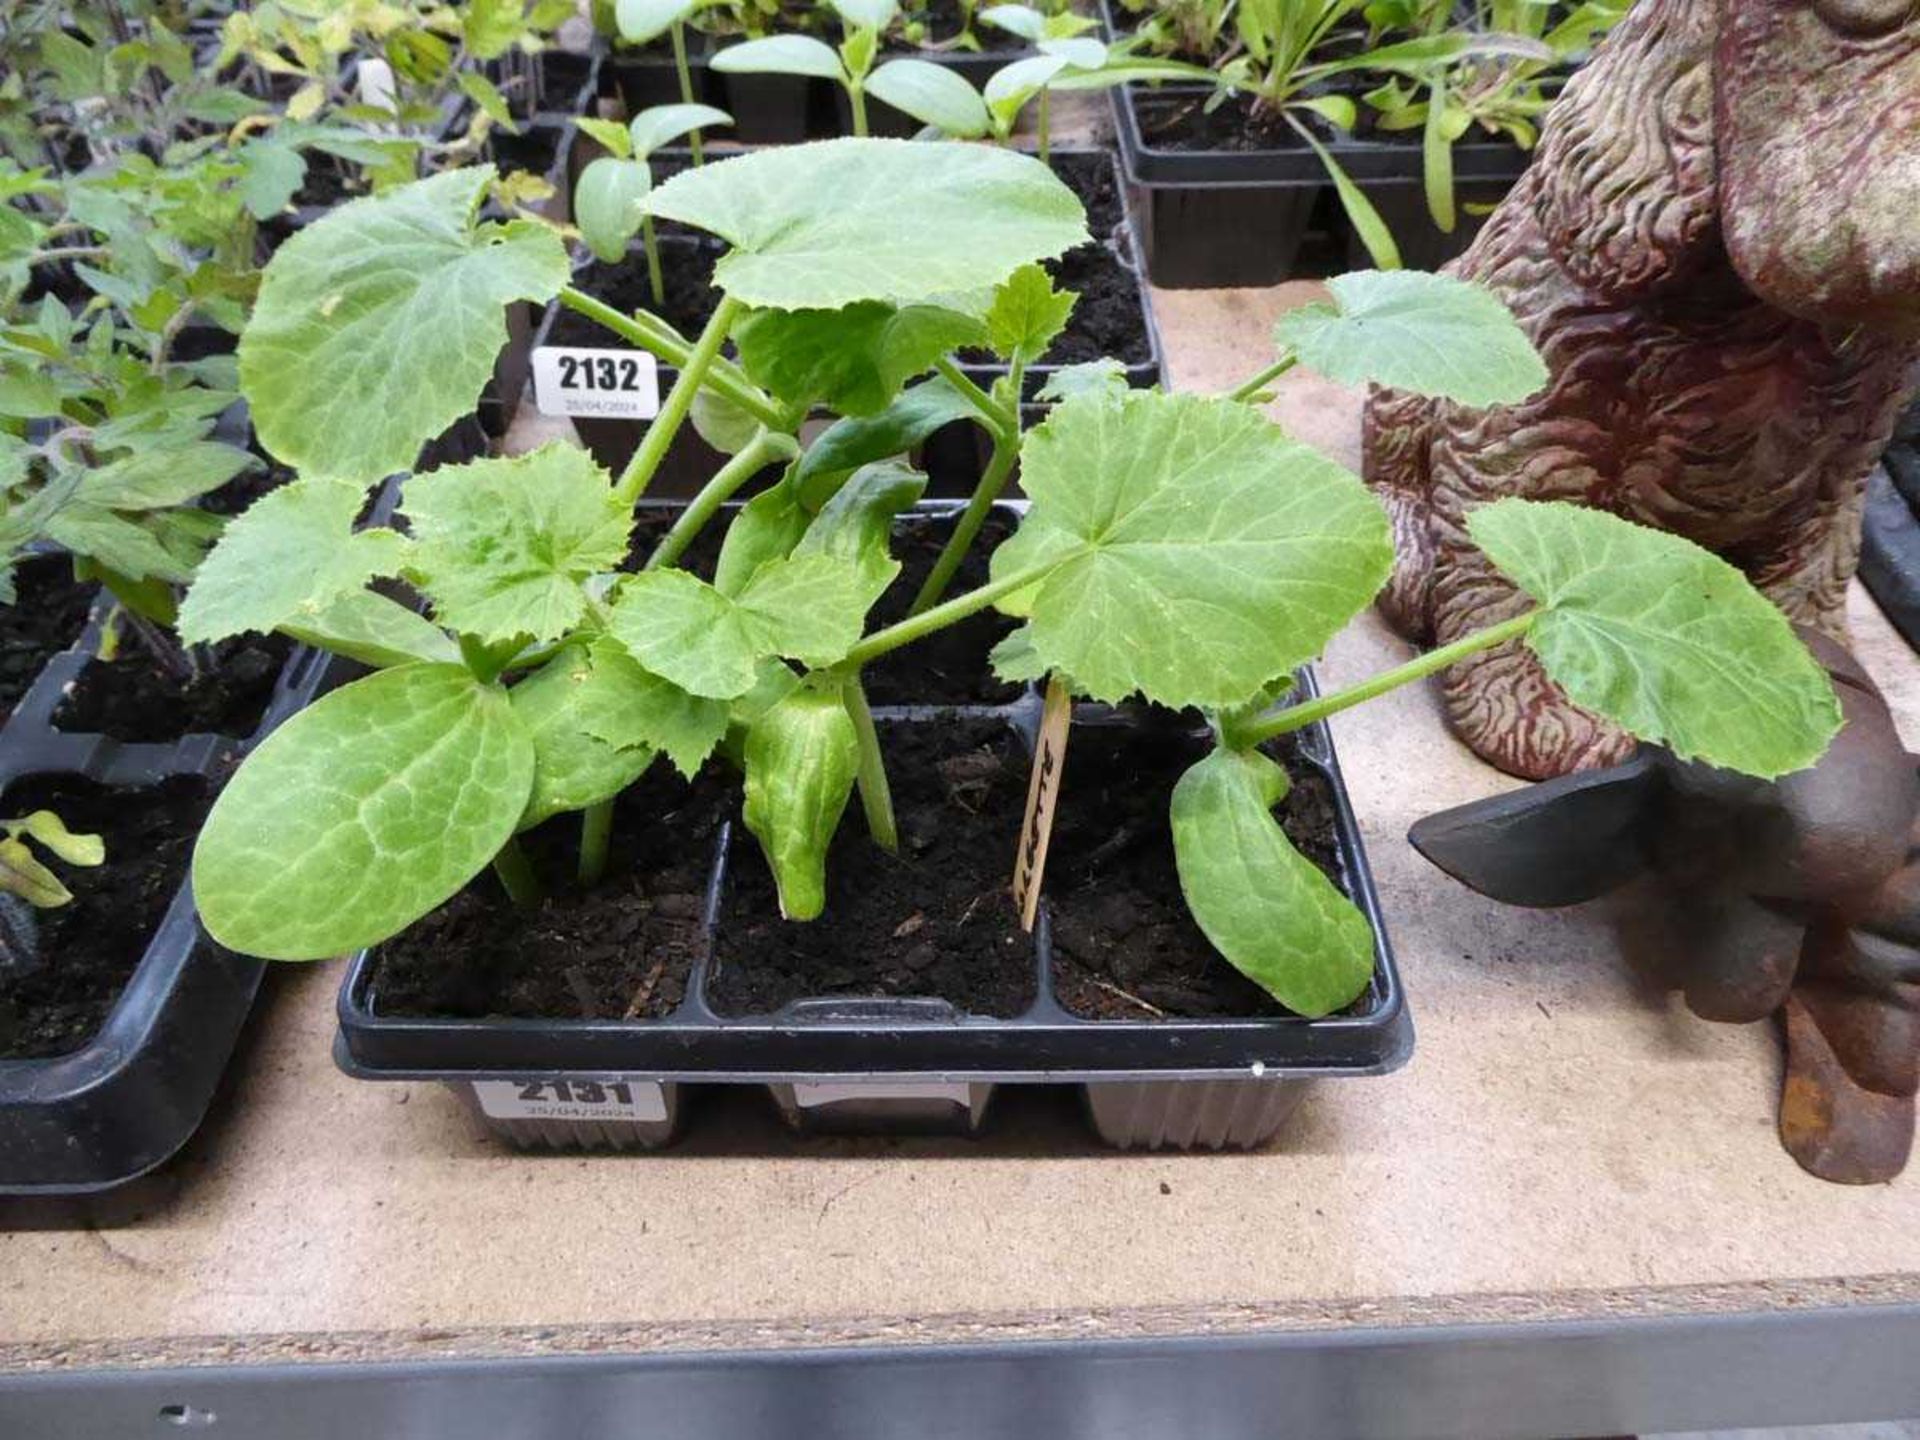 Tray containing 6 courgette plants